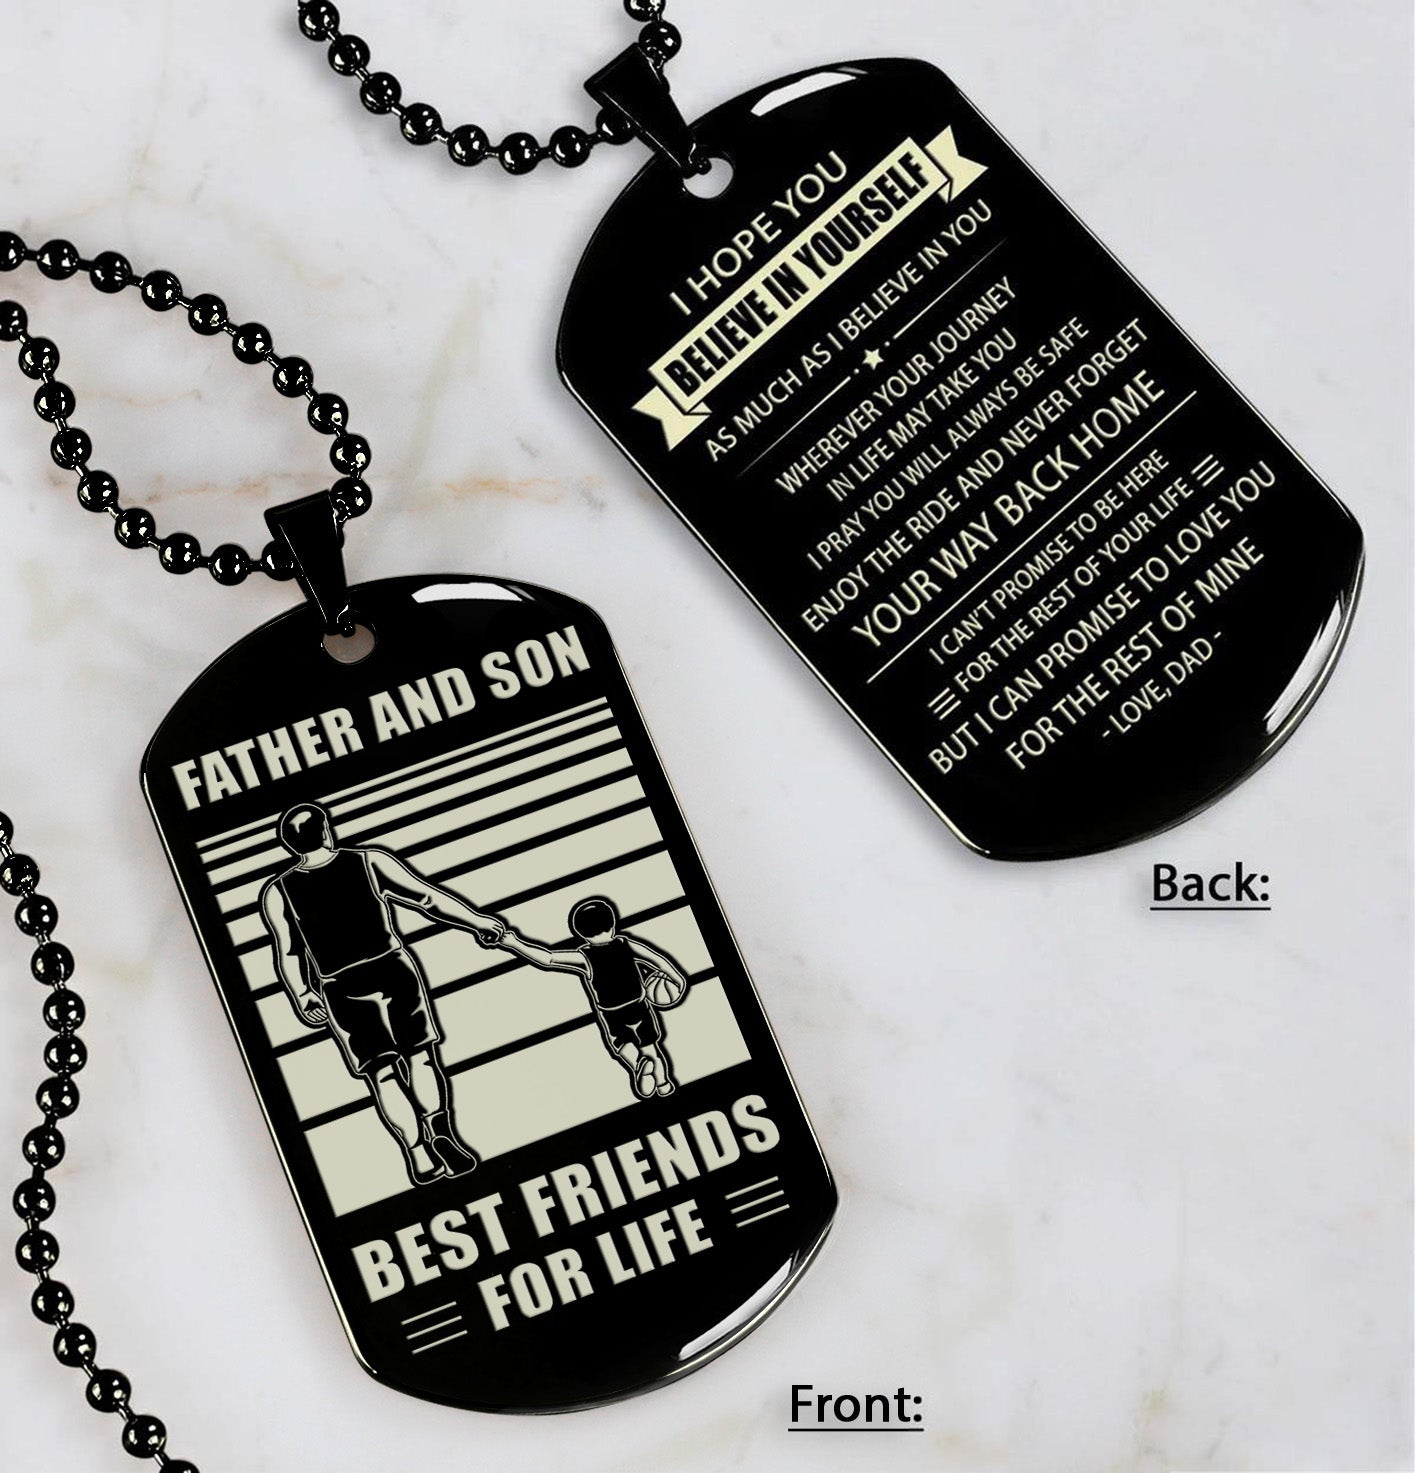 Soccer ANY Personalized Double Sided Dog Tag Father And Son Best Friends For Life - Message on the back side